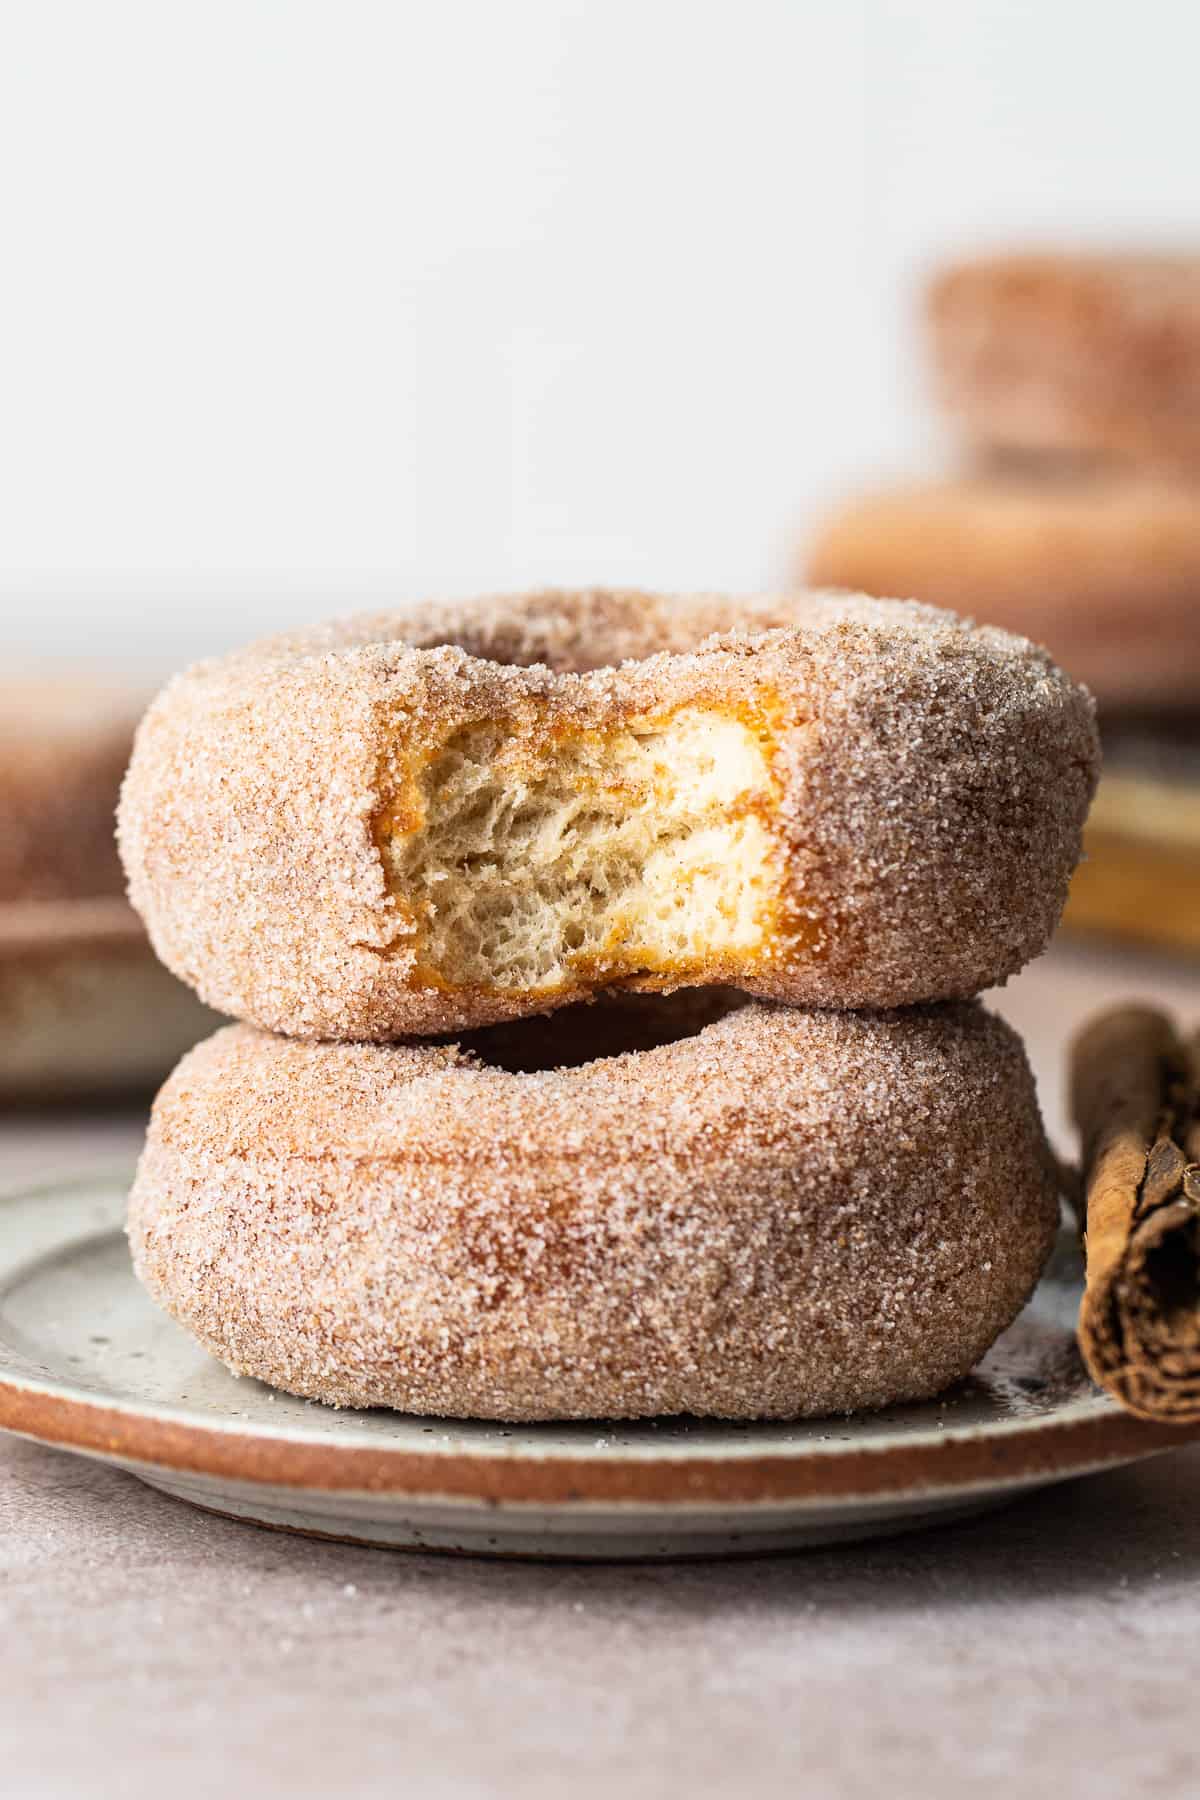 Mexican Donuts (Donas)